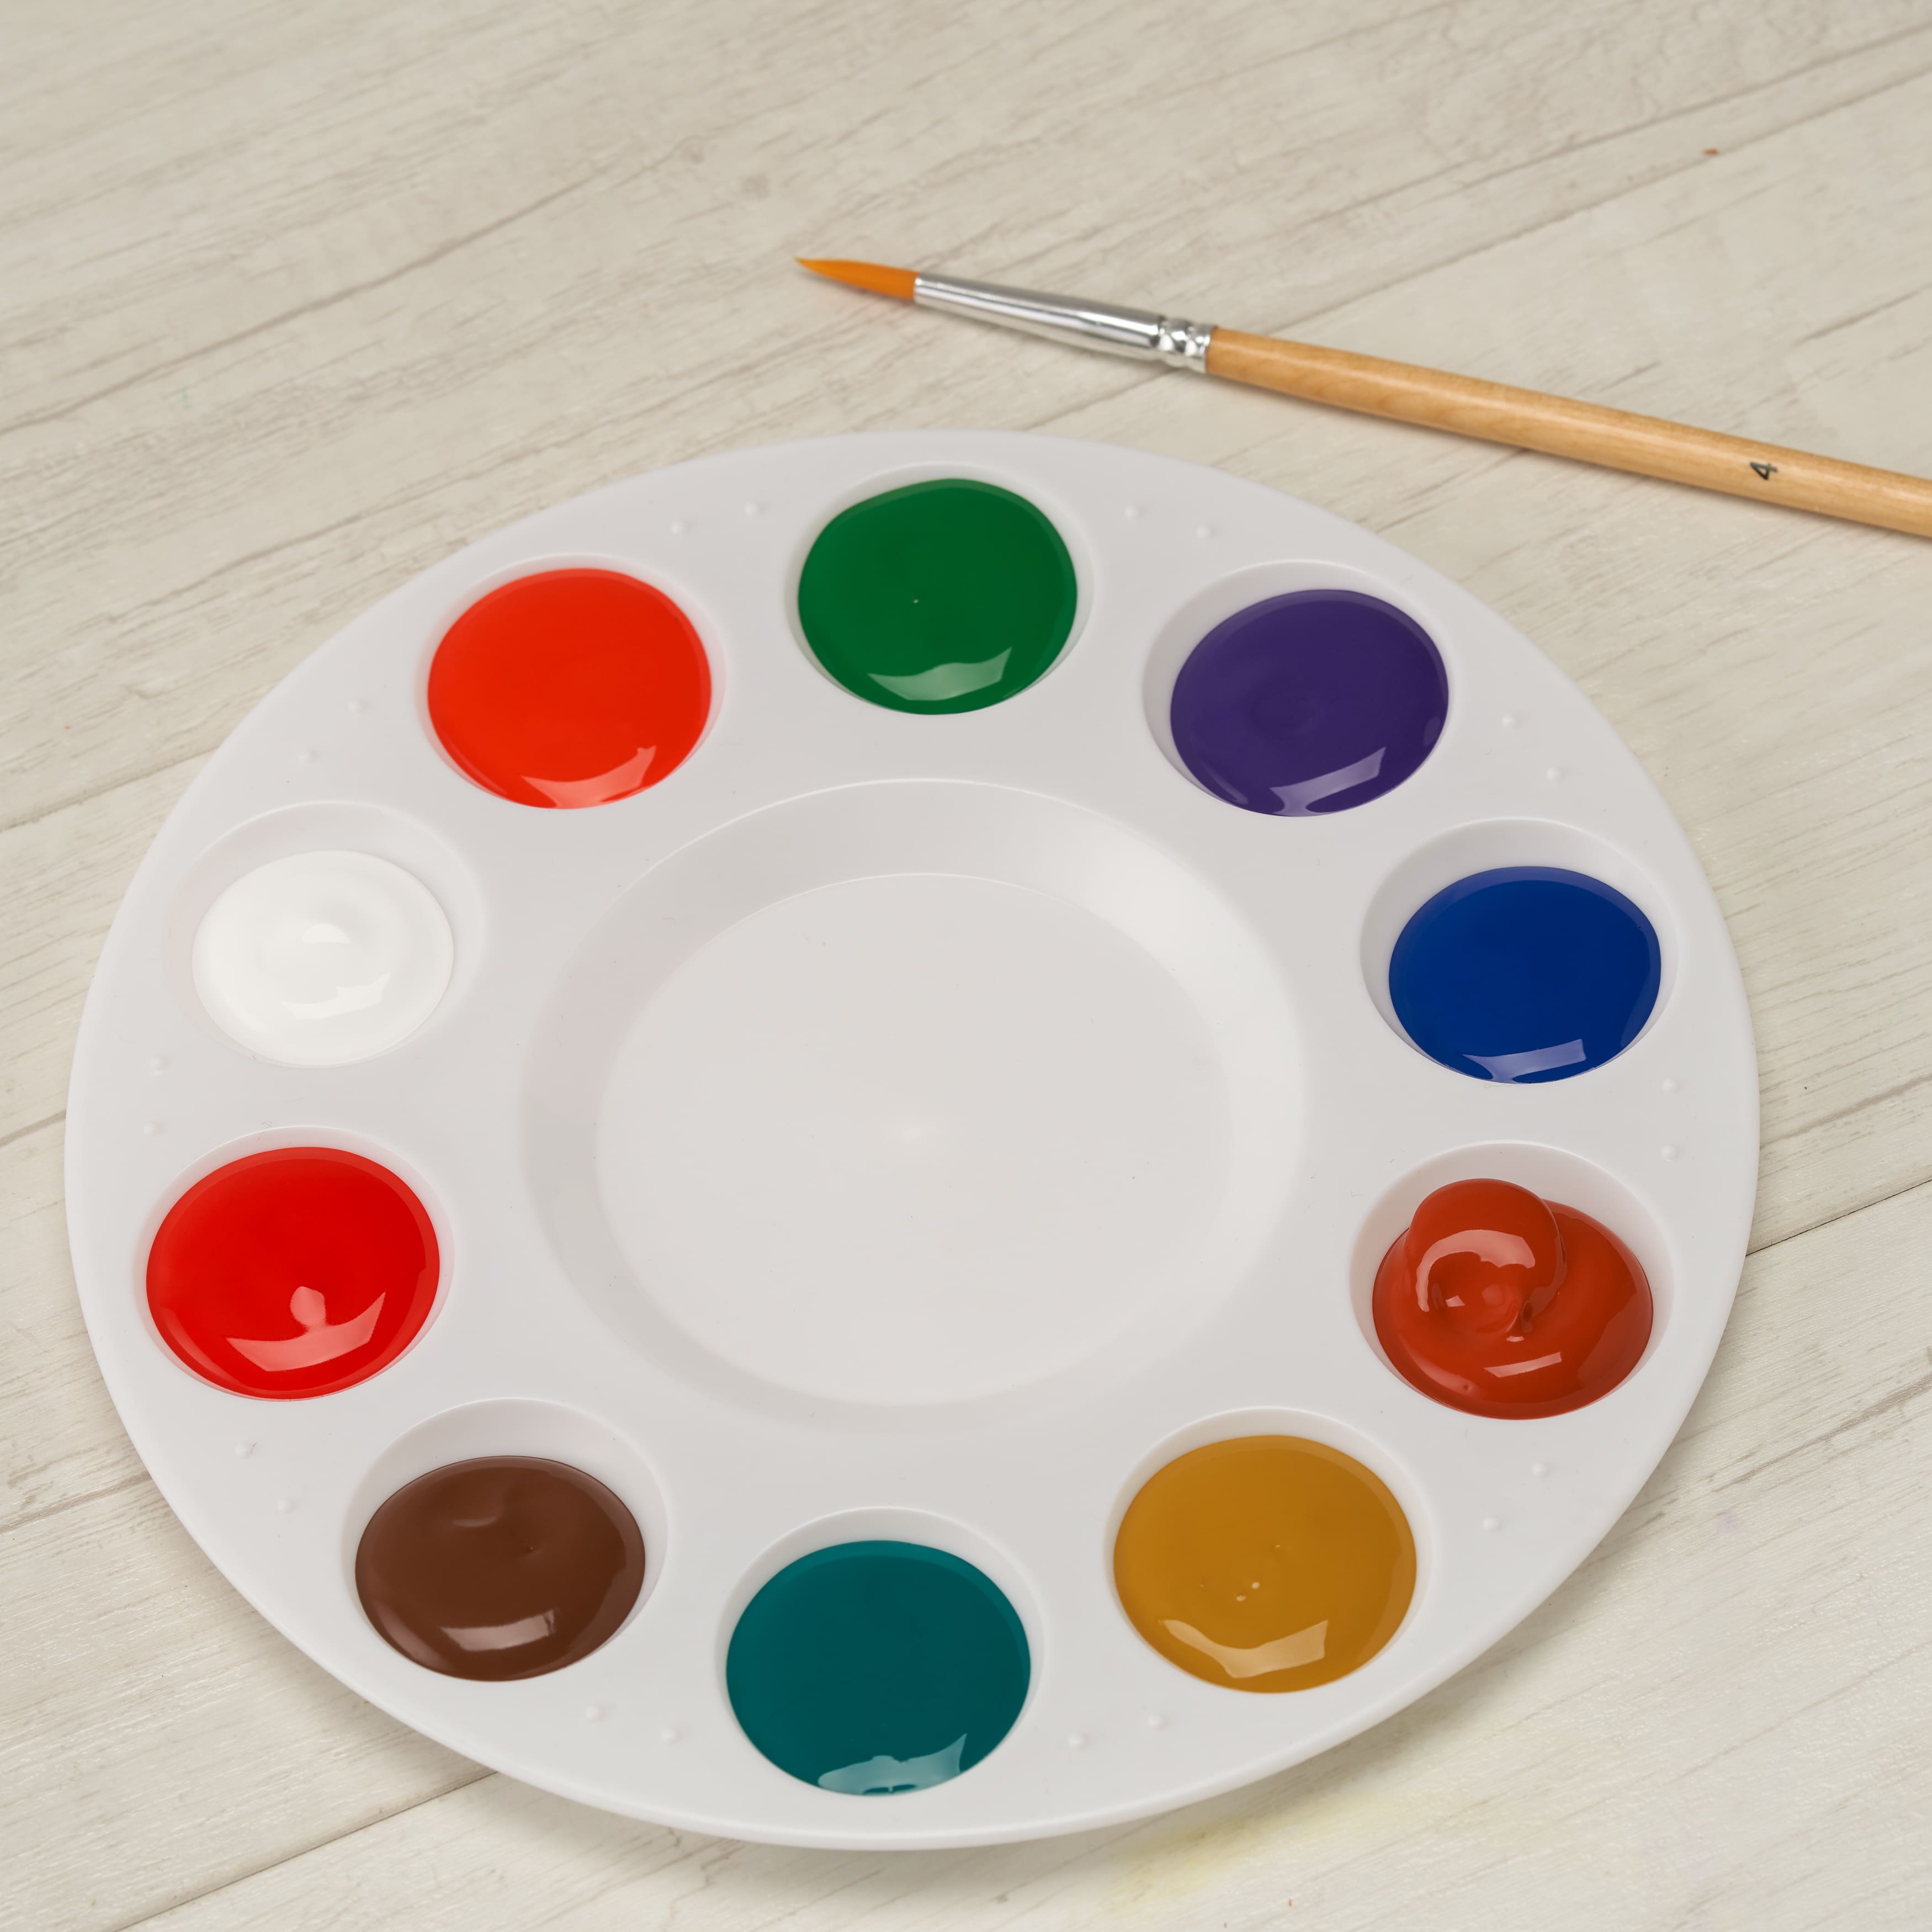 10 Well Paint Palette With Lid by Artsmith